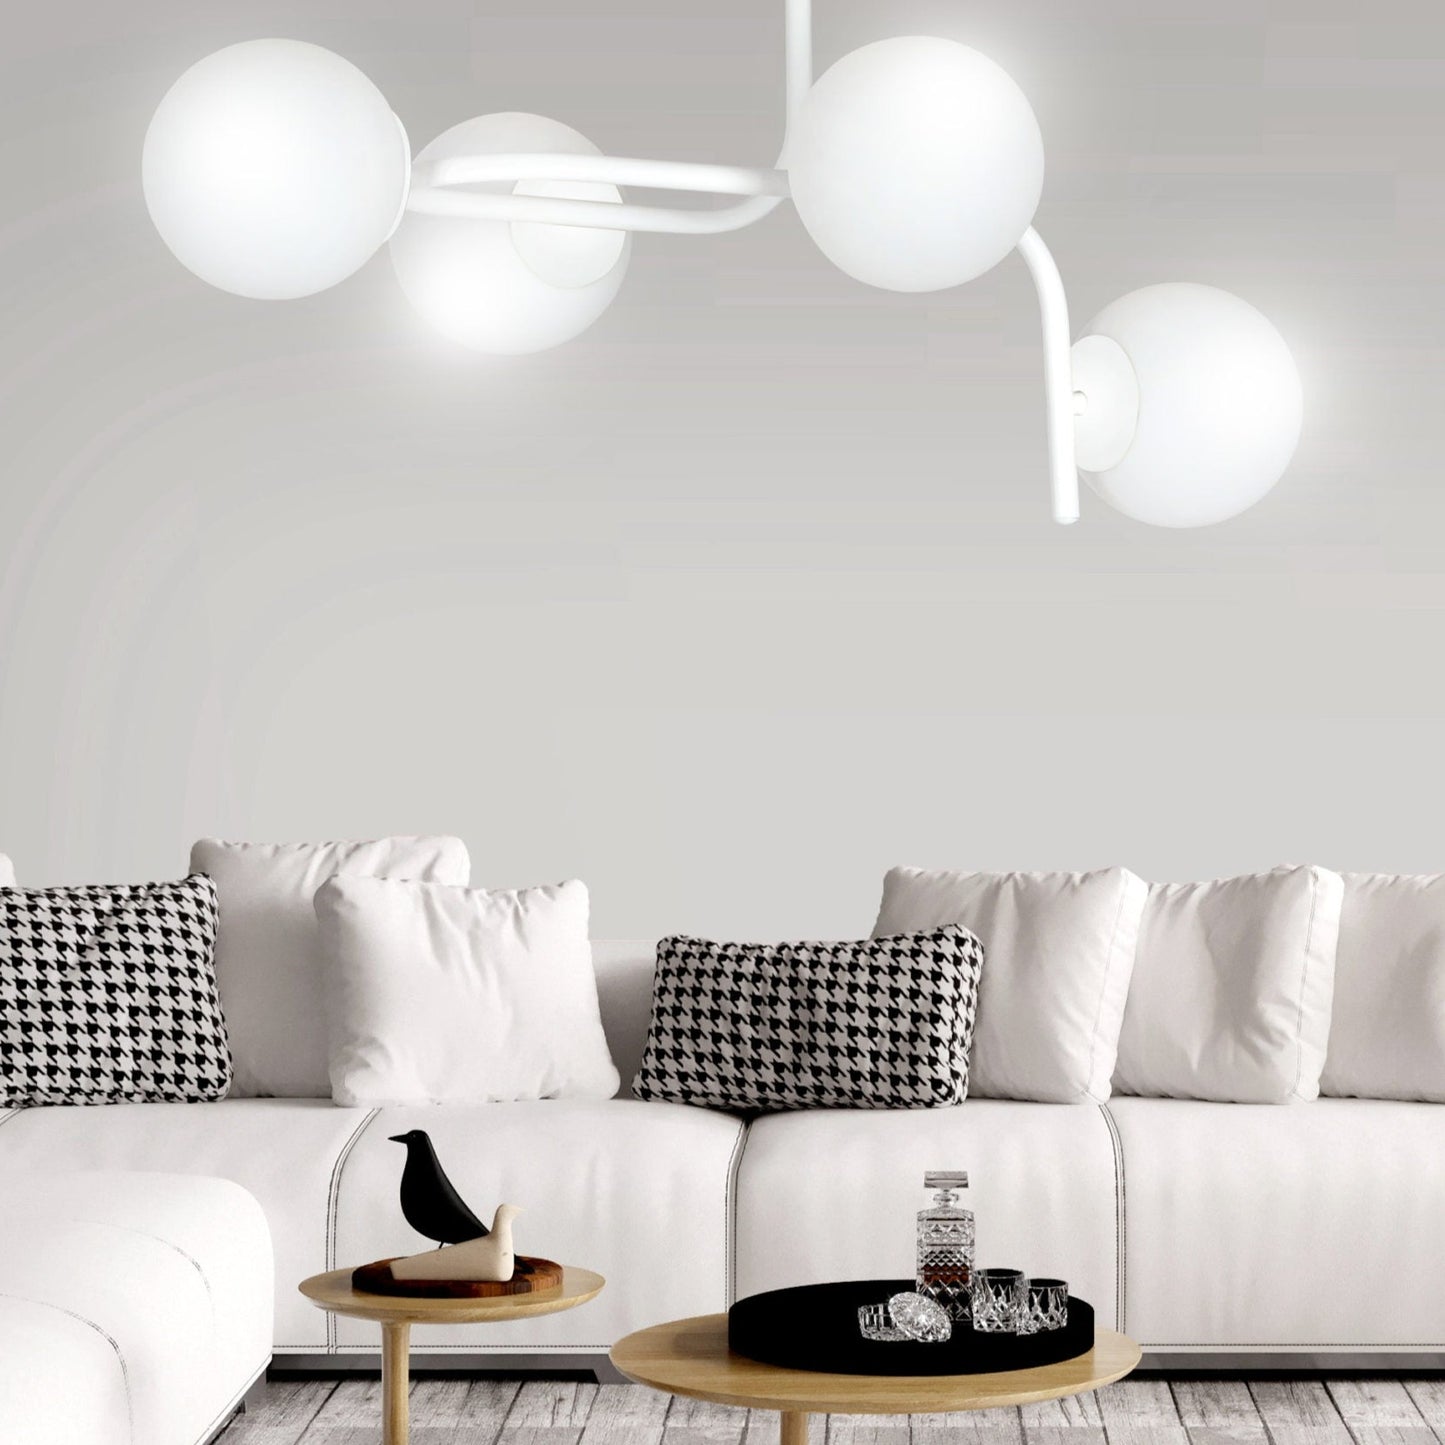 Kalf 4 is modern and contemporary in its design which is inspired by the industrial trend. The white powder coated arms are complimented by four round frosted glass globe shades creating a stand out feature for any living, dining or bedroom.